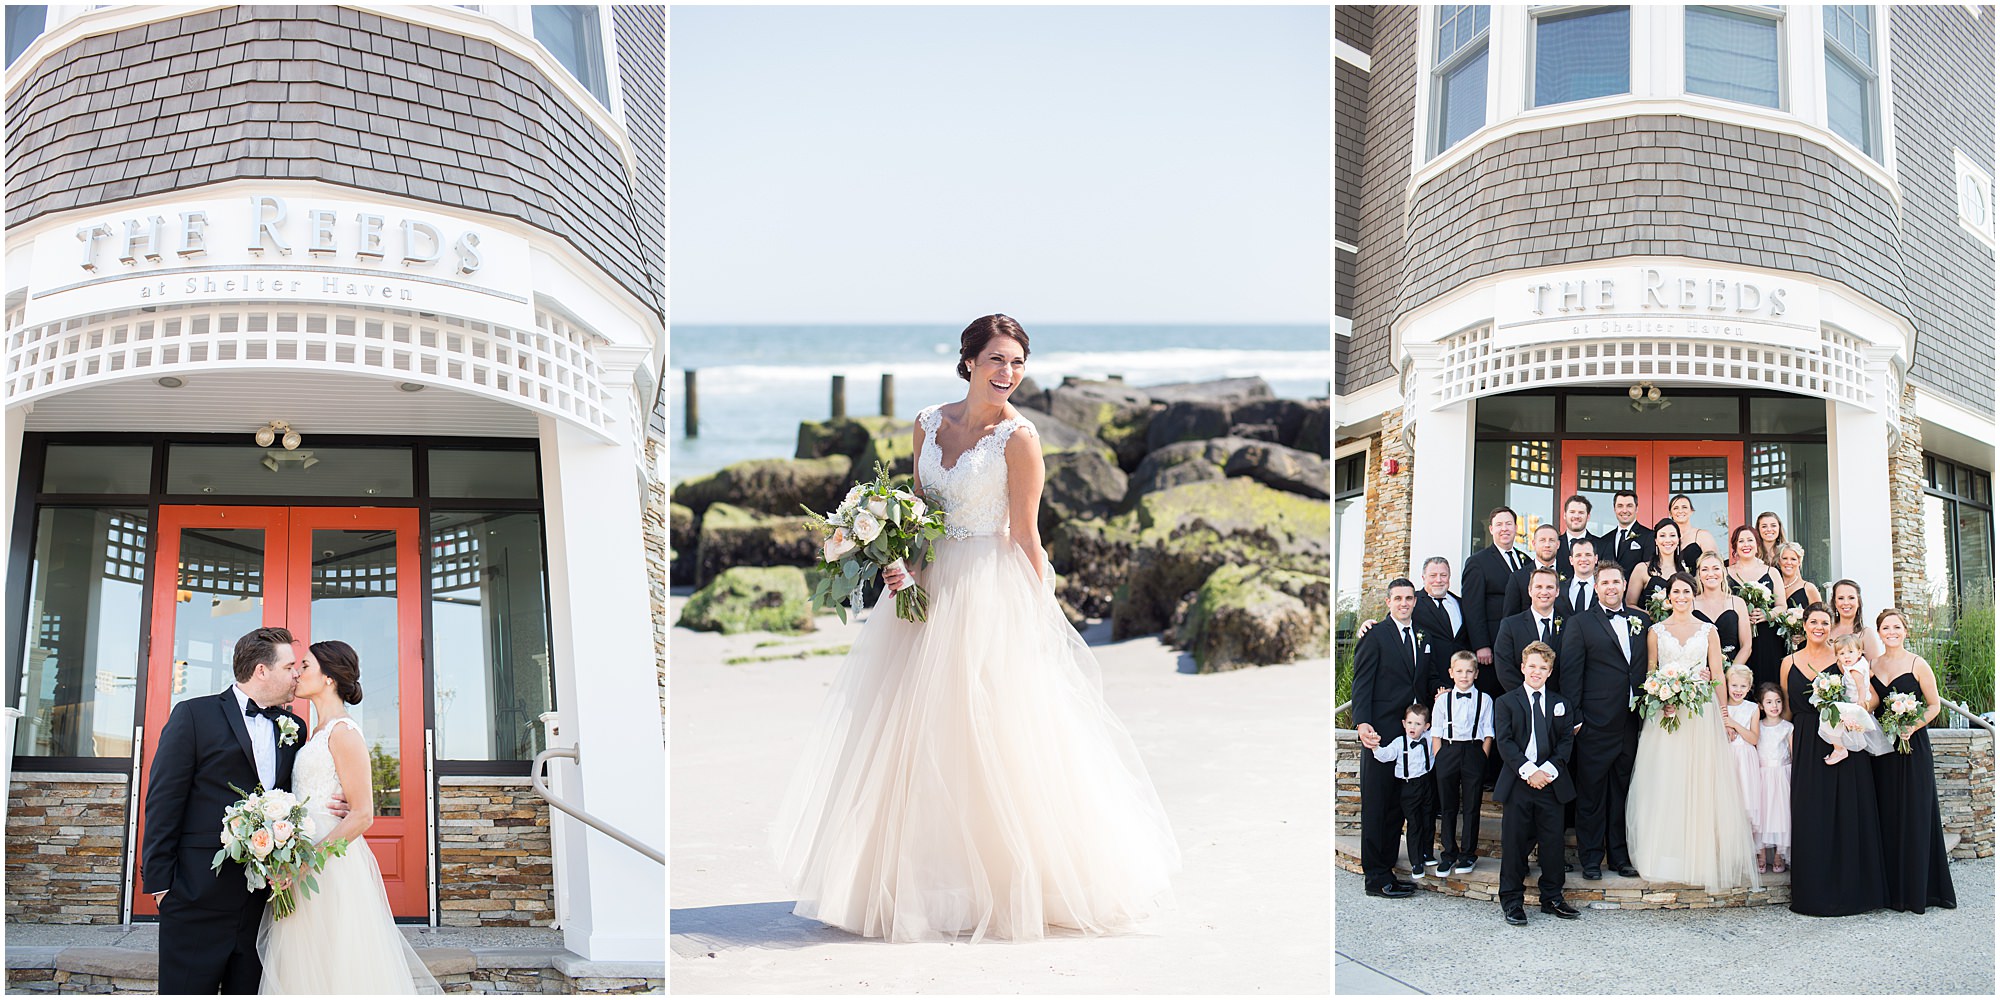 The photo opportunities at the Reeds at Shelter Haven makes it one of the best Jersey Shore wedding venues